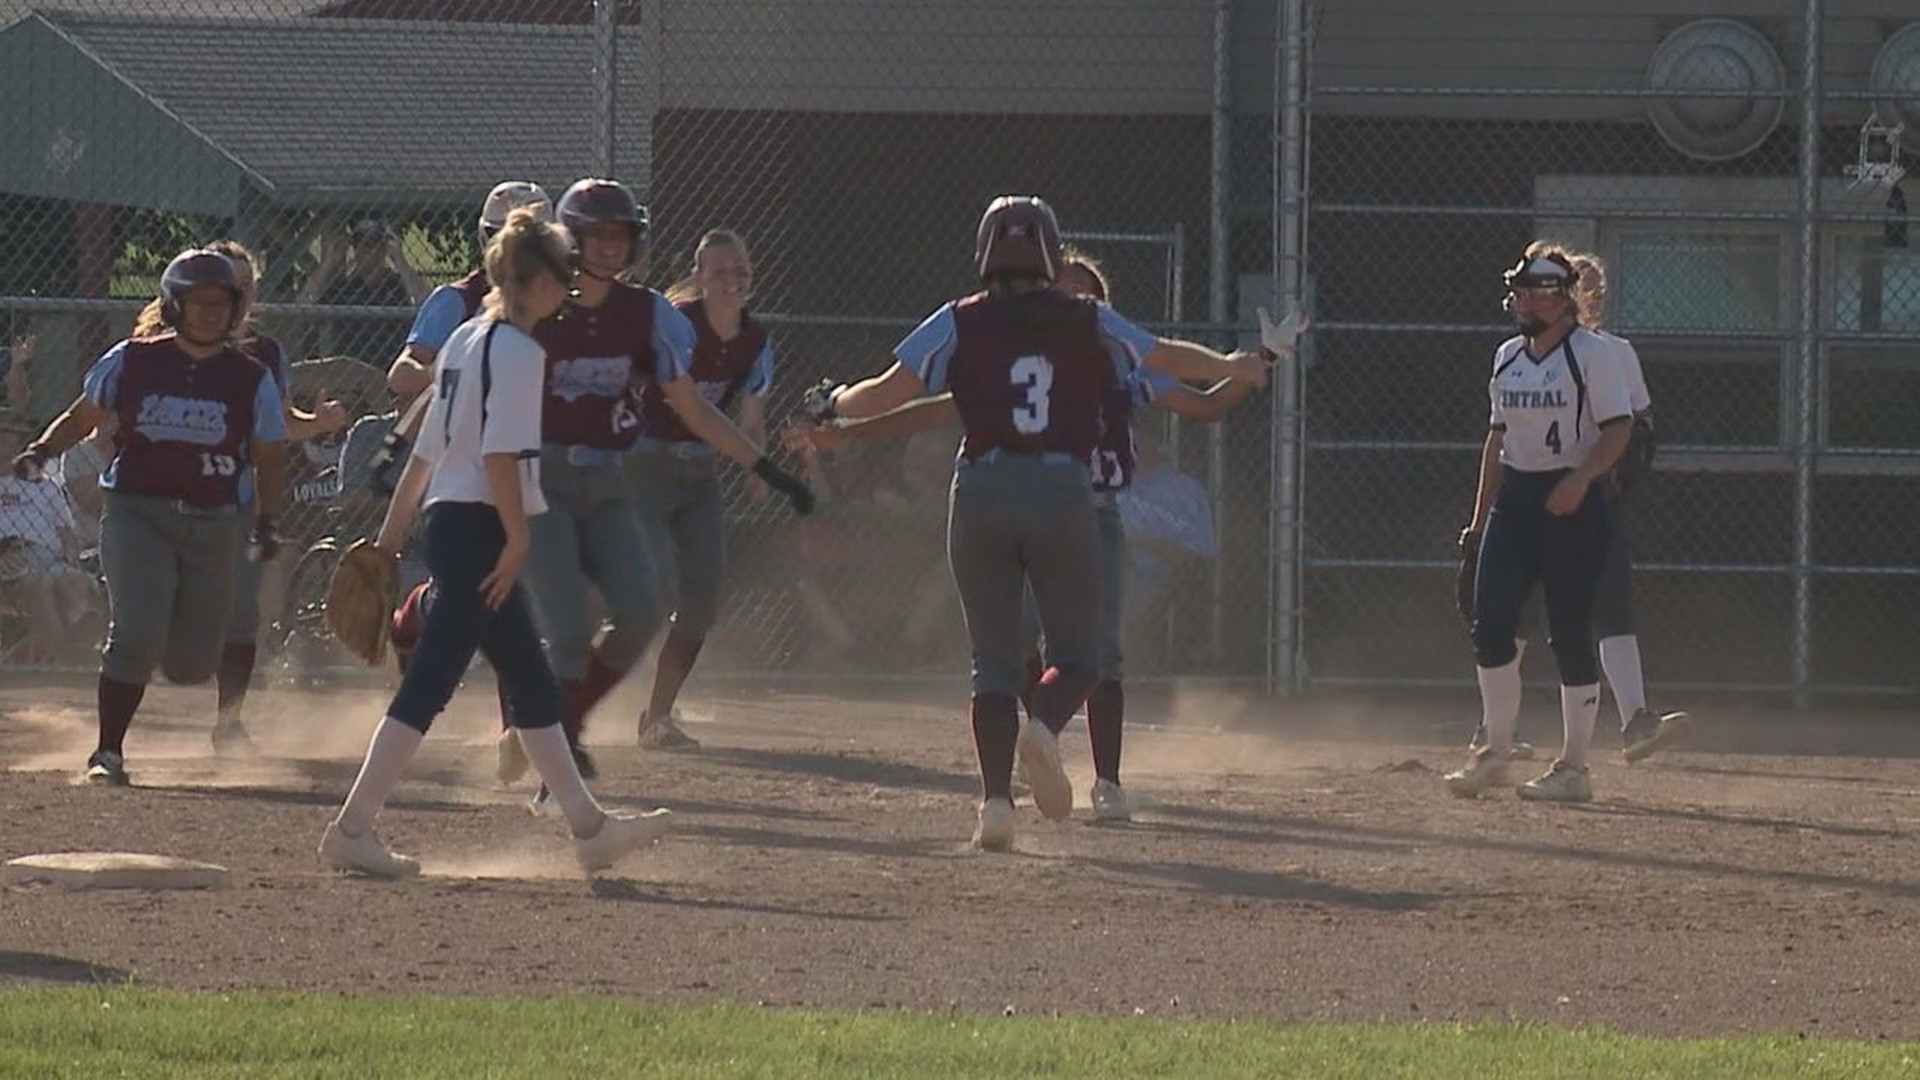 Gee's Single in the 8th gave Loyalsock a 2-1 Win Over Central Columbia in the Championship